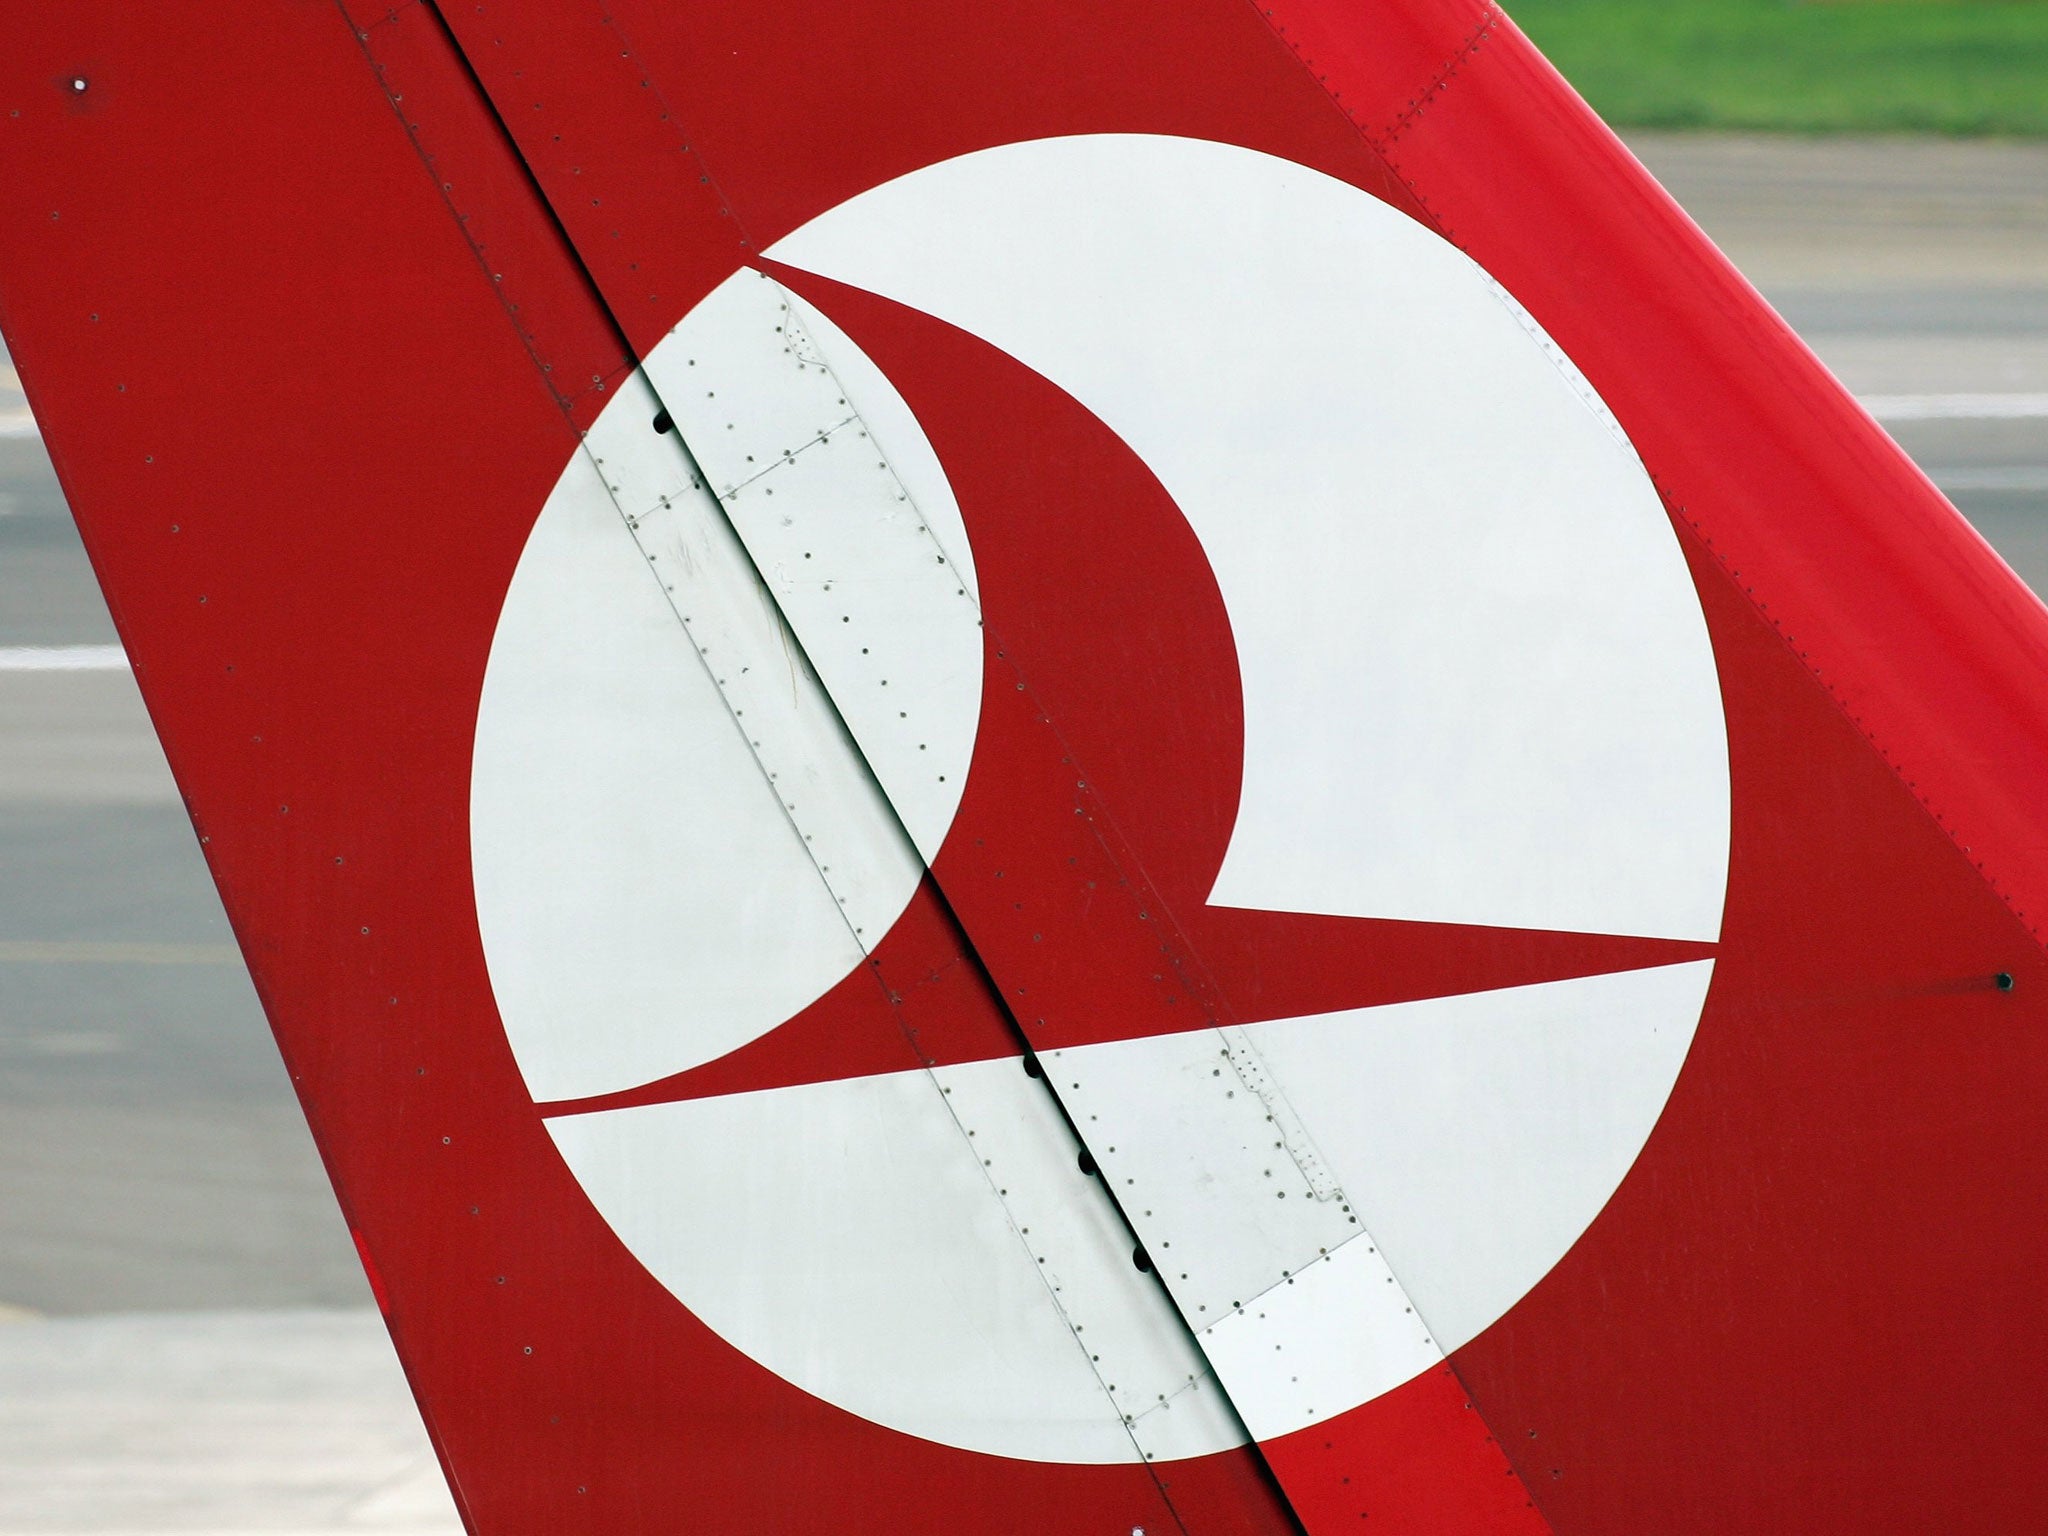 A Turkish Airlines aircraft made an emergency landing today following a bomb scare.